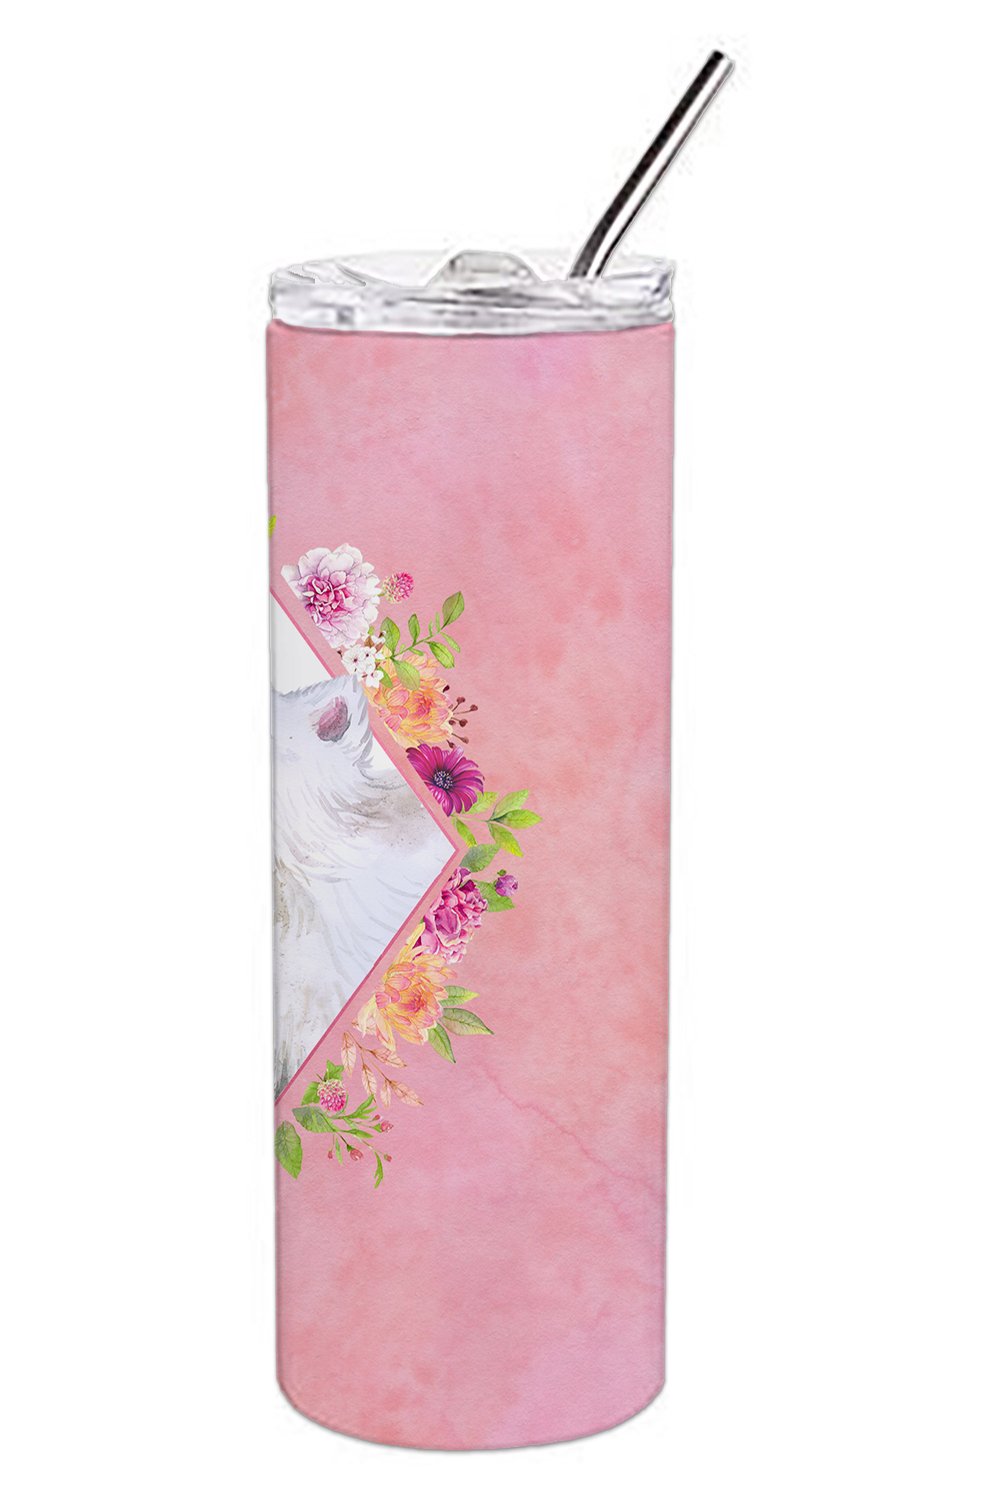 Samoyed Pink Flowers Double Walled Stainless Steel 20 oz Skinny Tumbler CK4177TBL20 by Caroline's Treasures